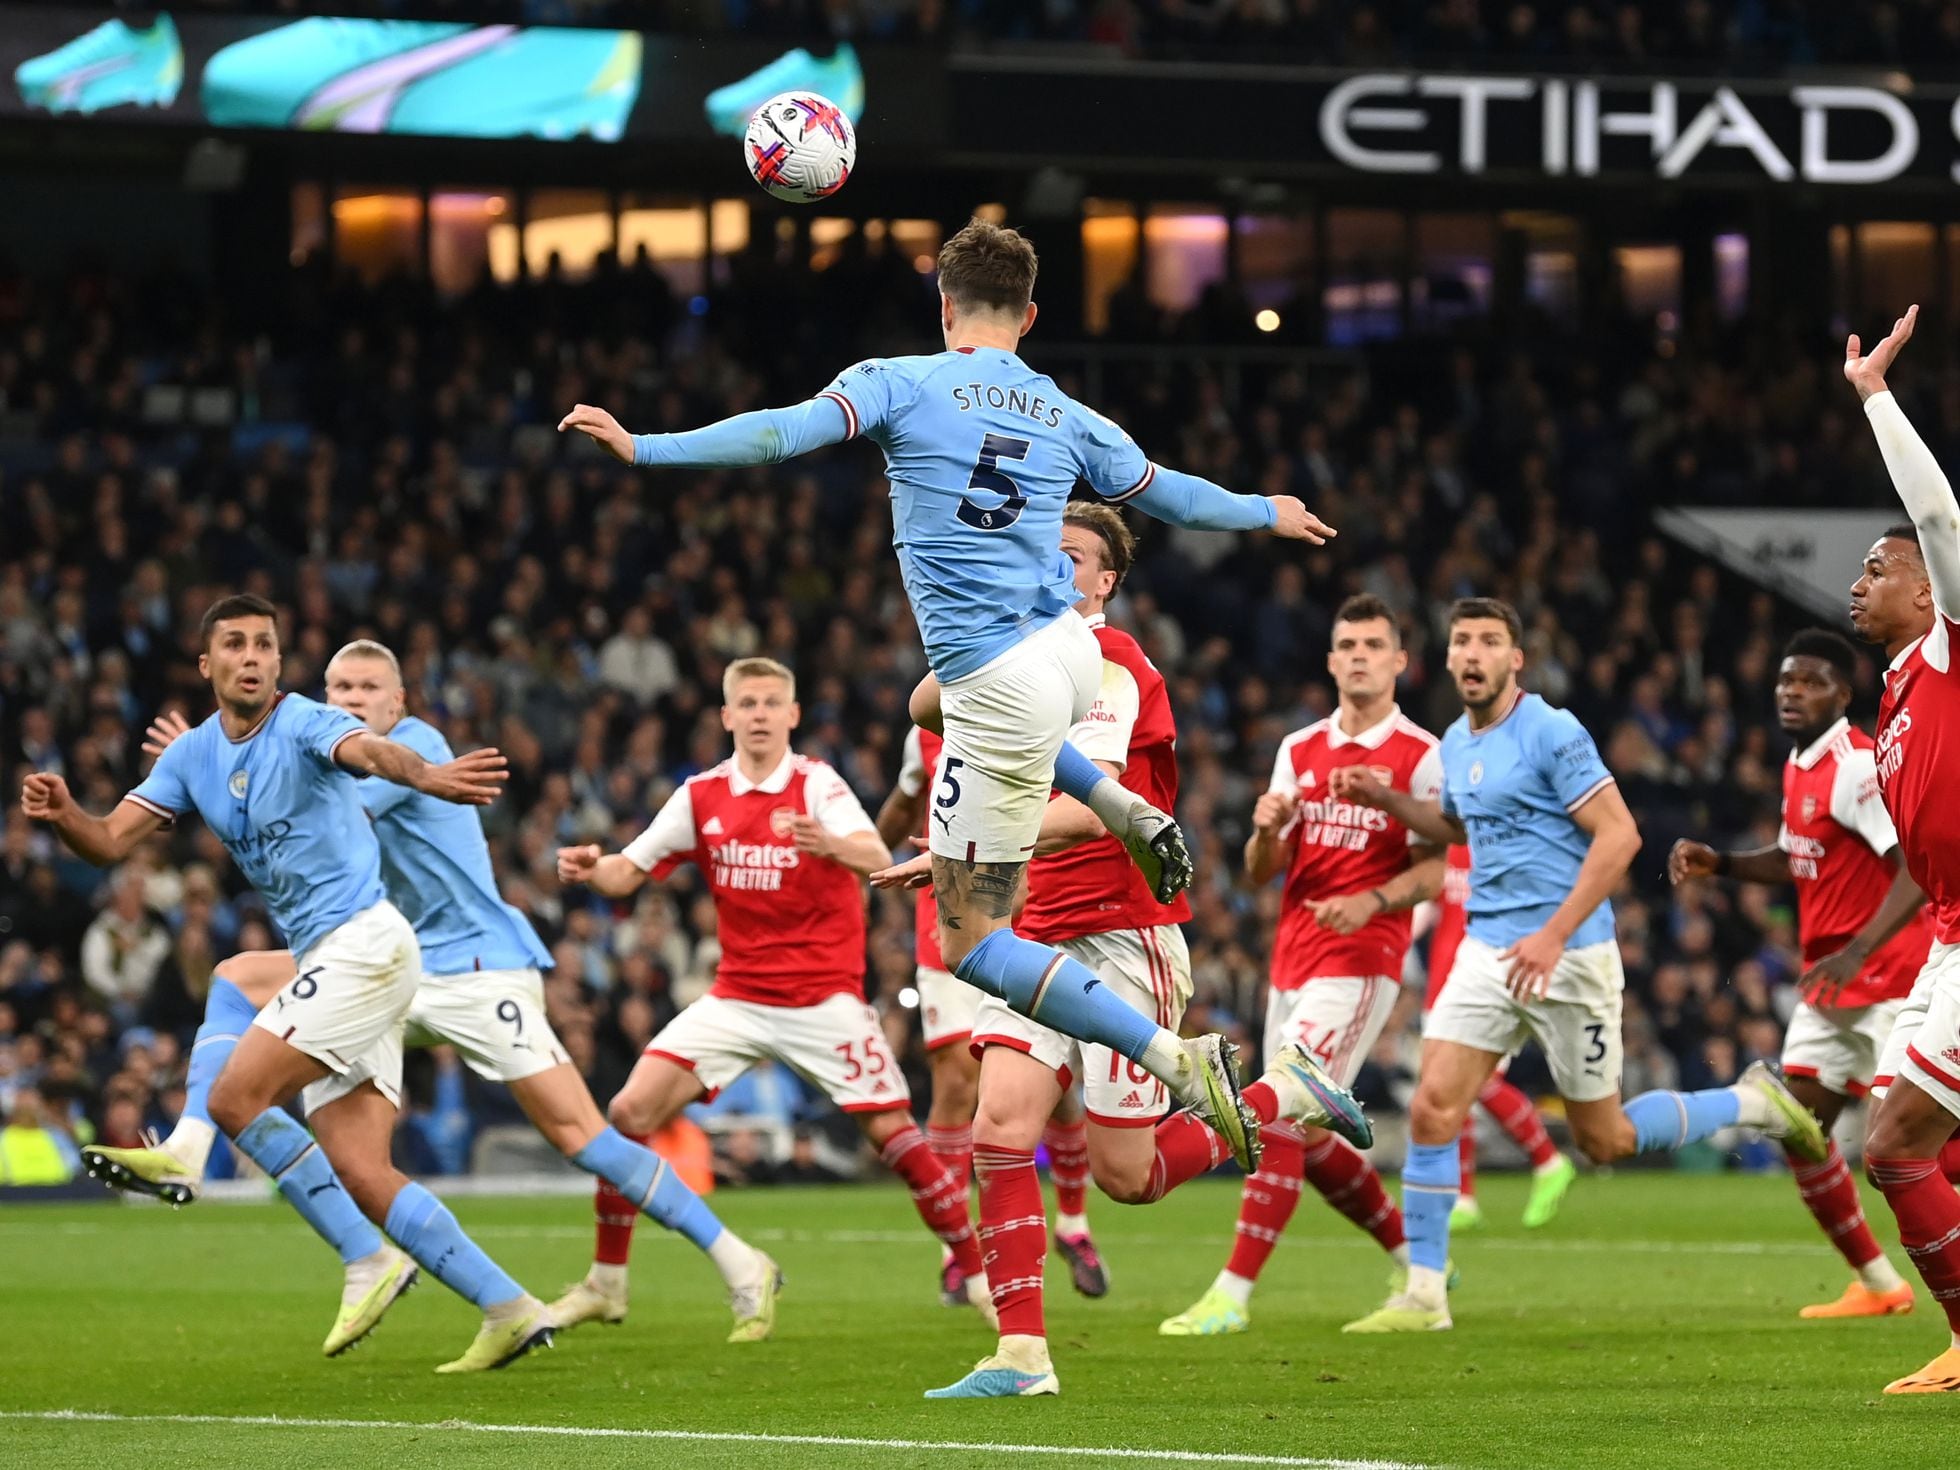 Man City beats Arsenal 4-1, and the Premier League title is in